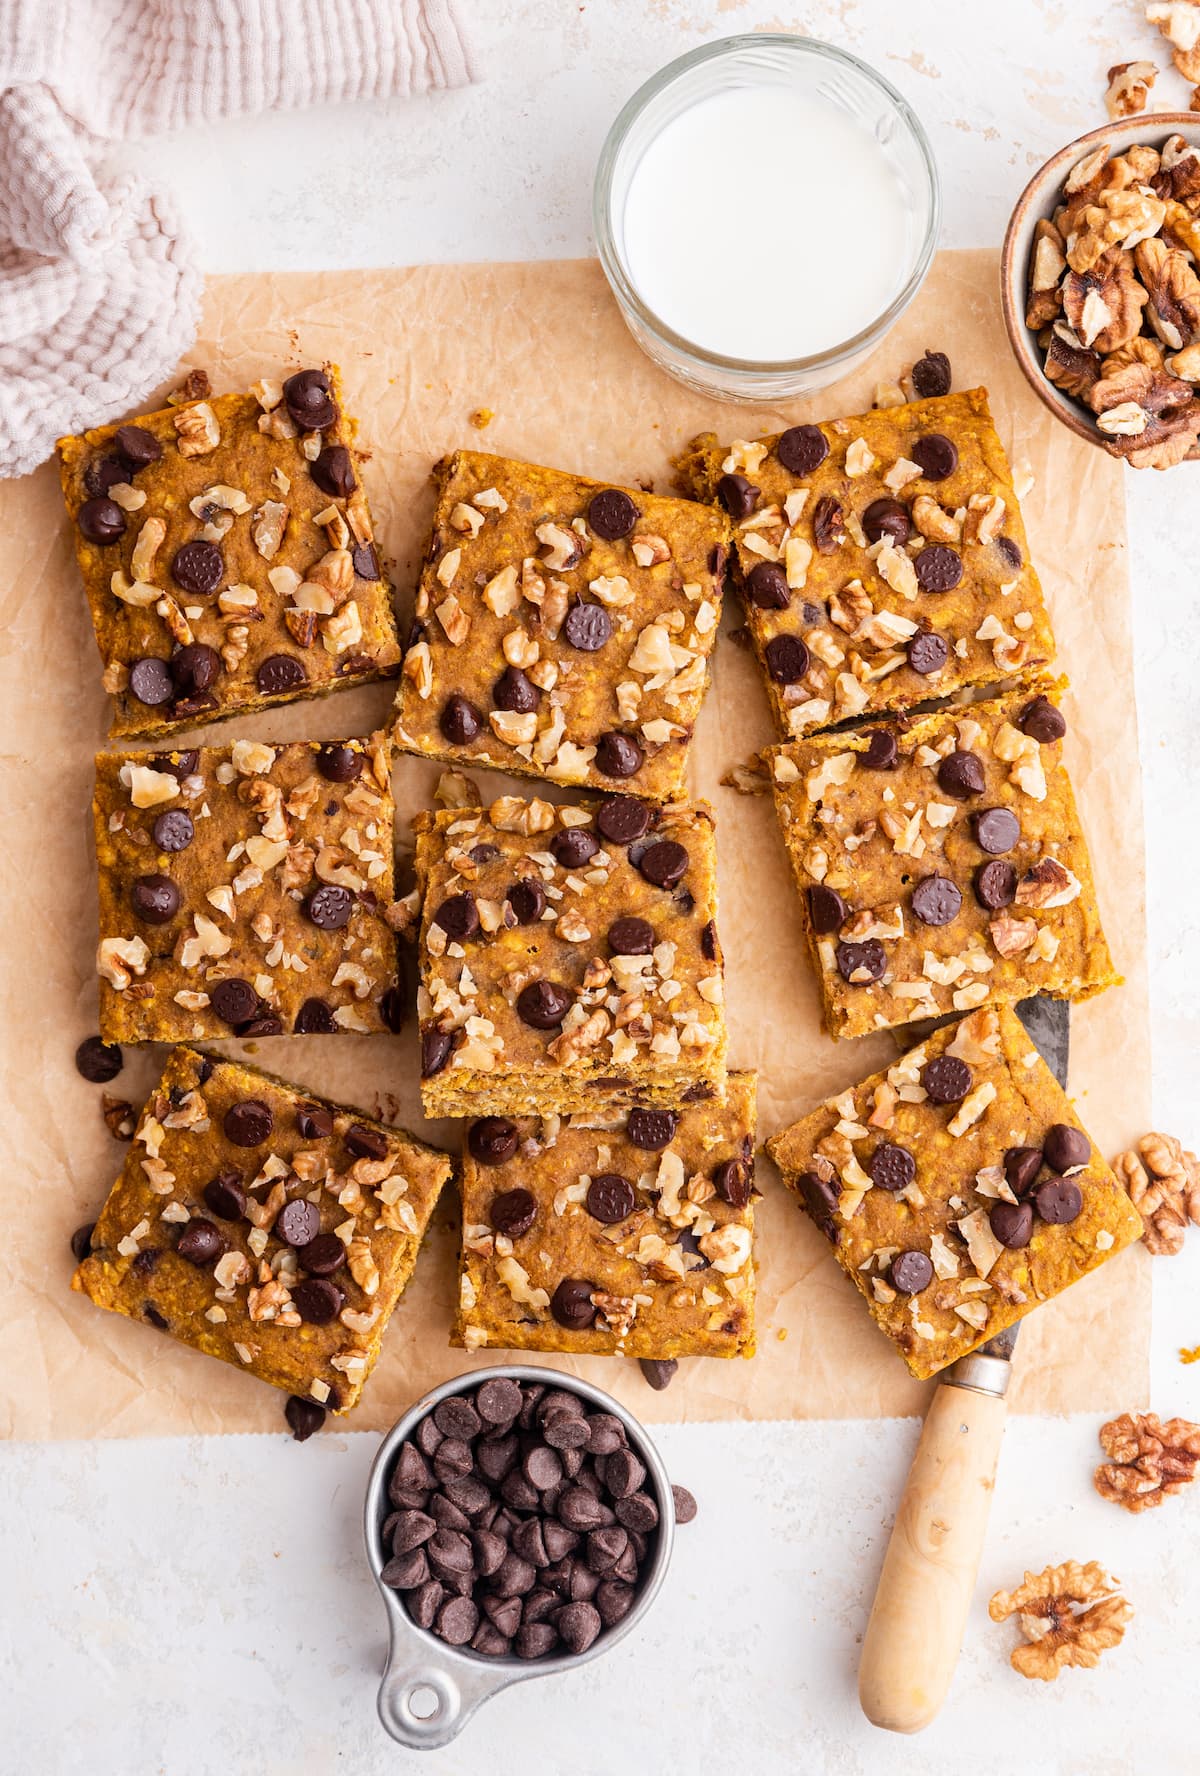 Pumpkin oatmeal bars on parchment paper near a glass of milk, a knife, a small bowl of walnuts, and a small bowl of chocolate chips.